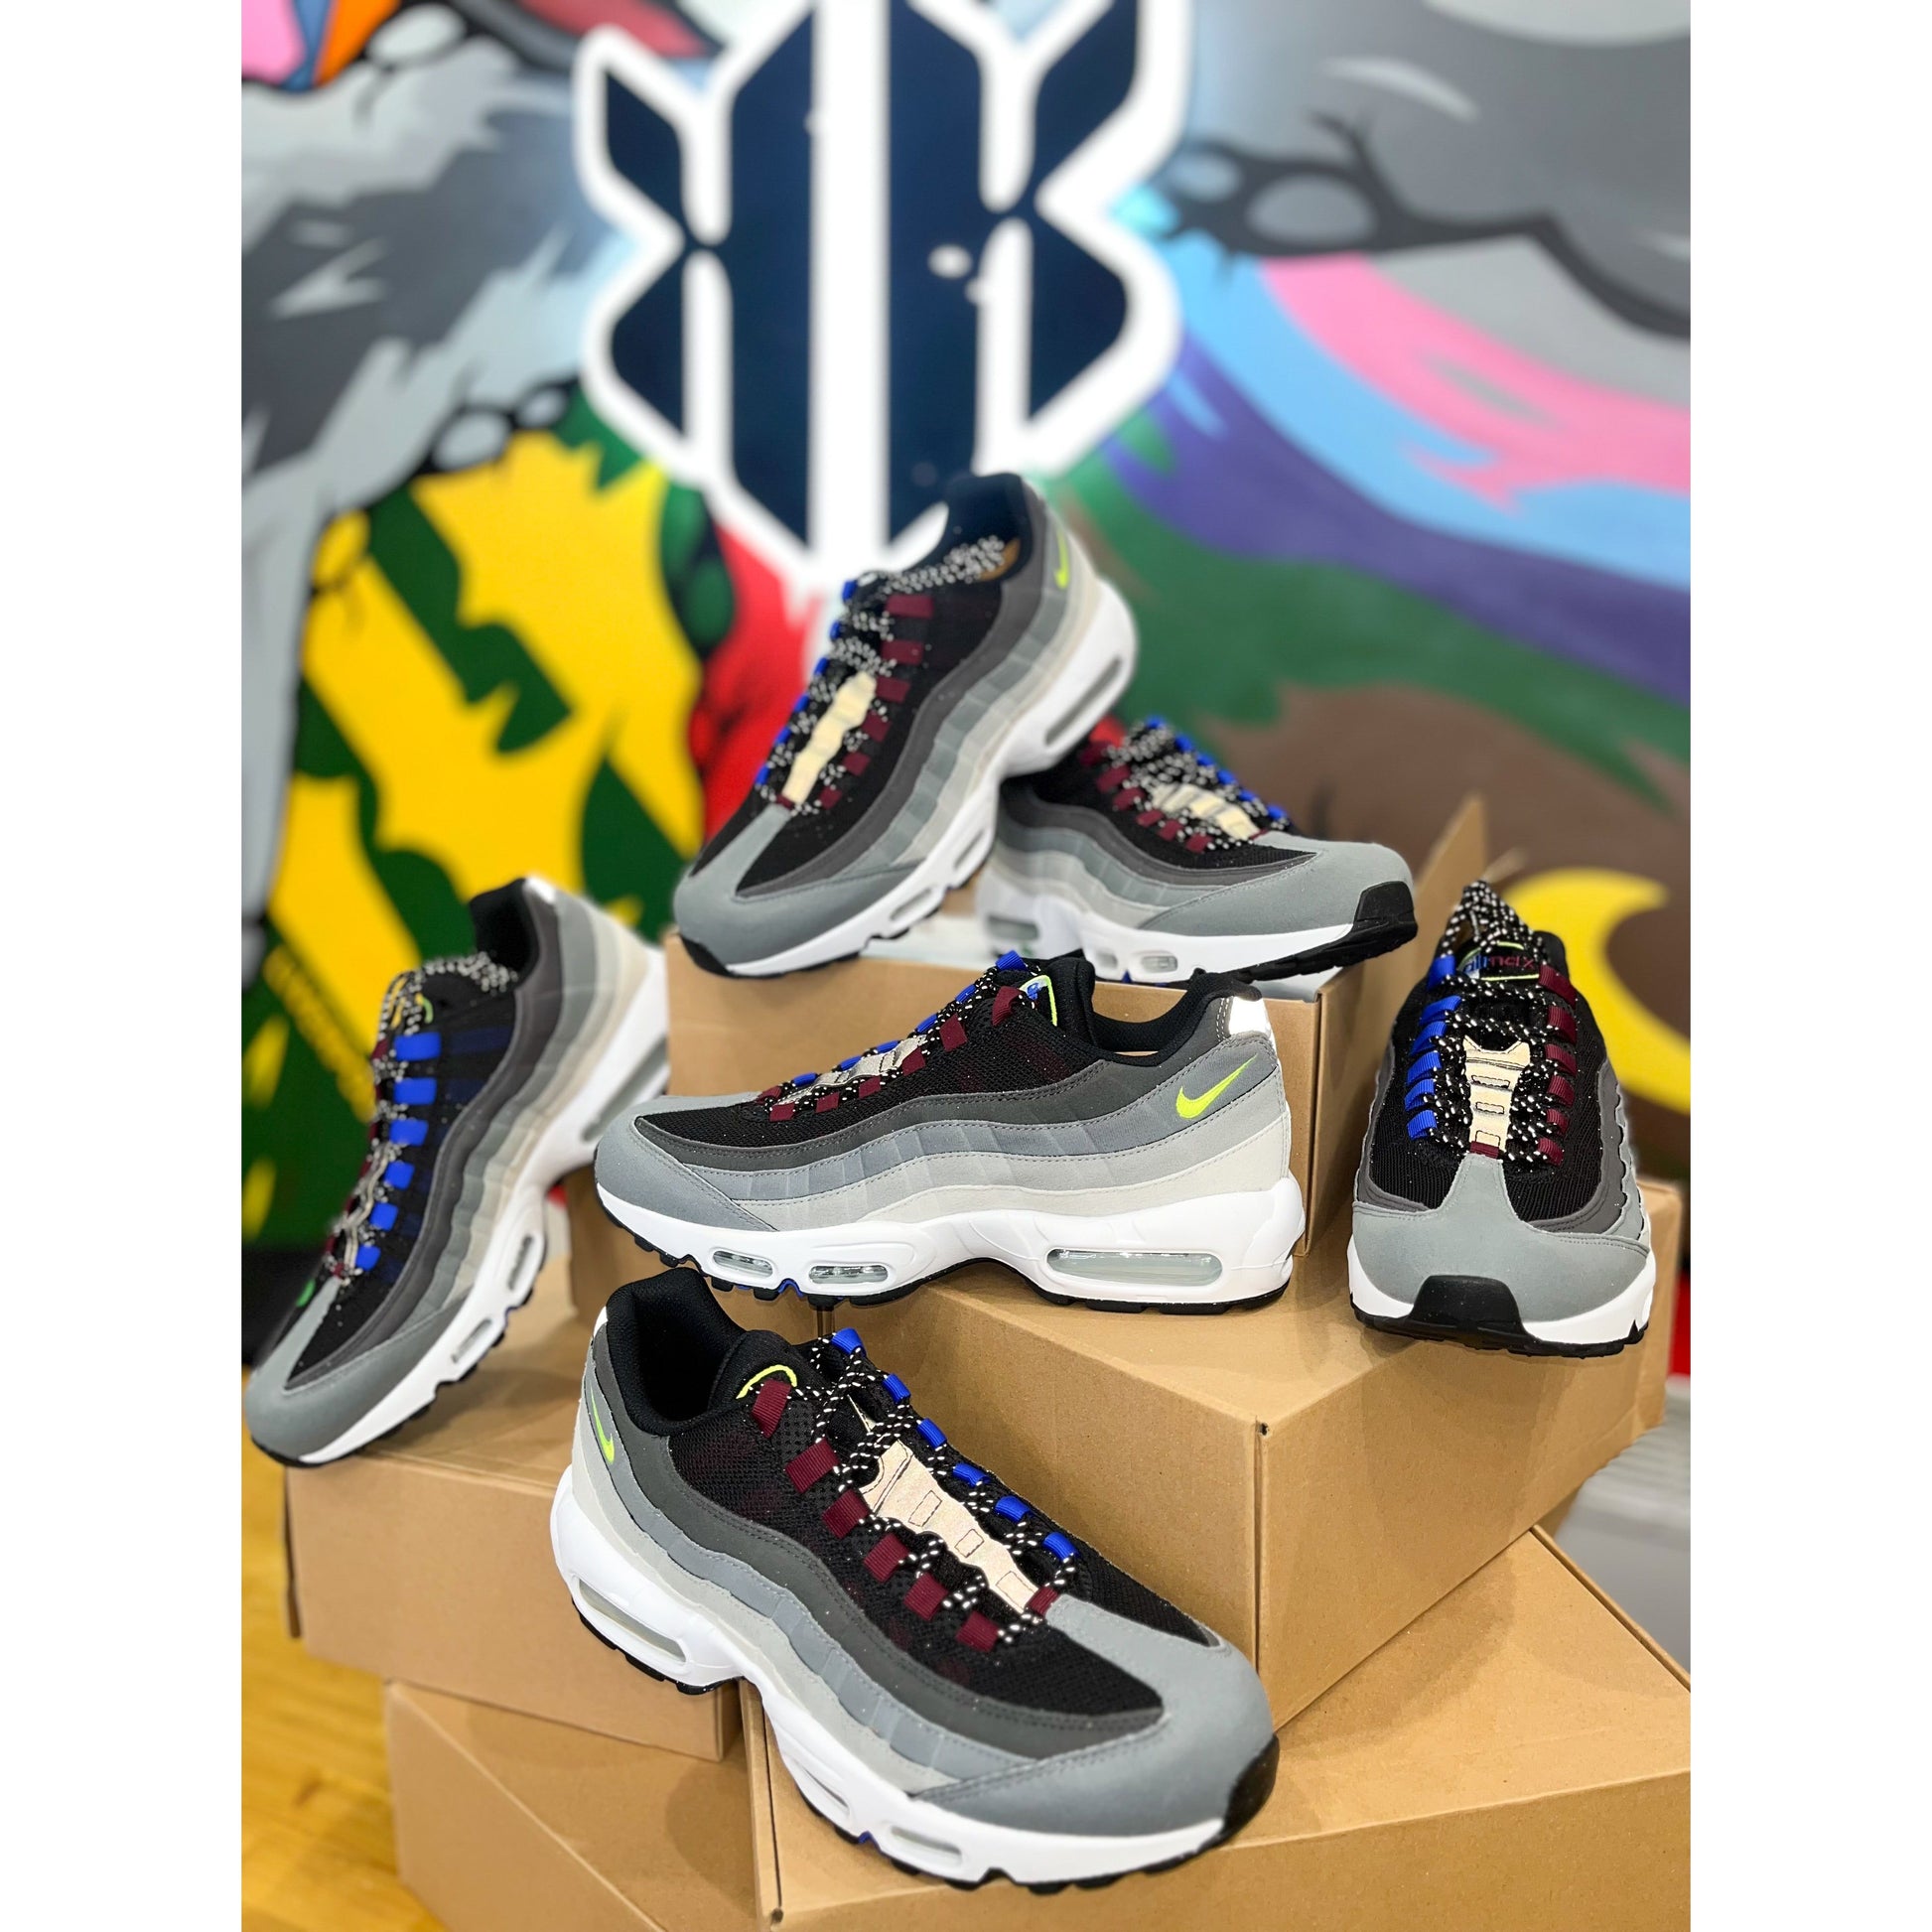 Nike Air Max 95 Greedy 4.0 by Nike from £165.00